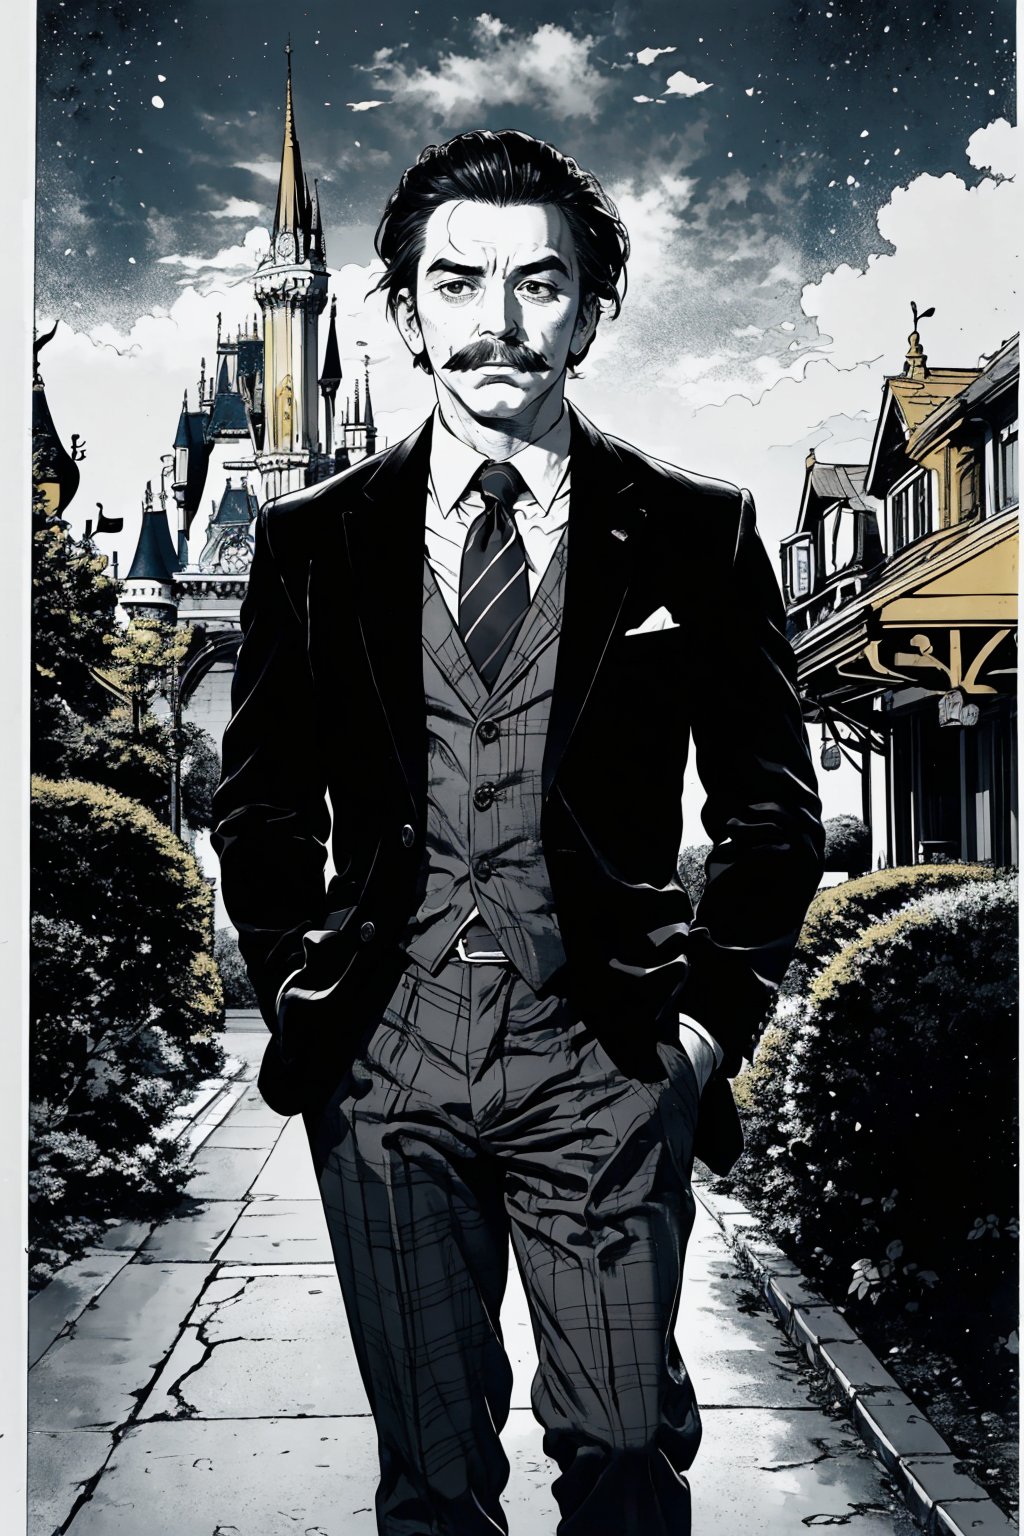 boichi manga style, monochrome, greyscale, solo, a young man, he is Walt Disney, the founder of Disneyland, slicked hairstyle, mustache, traditional plaid suit, spread his hands, full body shot, a country station background, ((masterpiece))